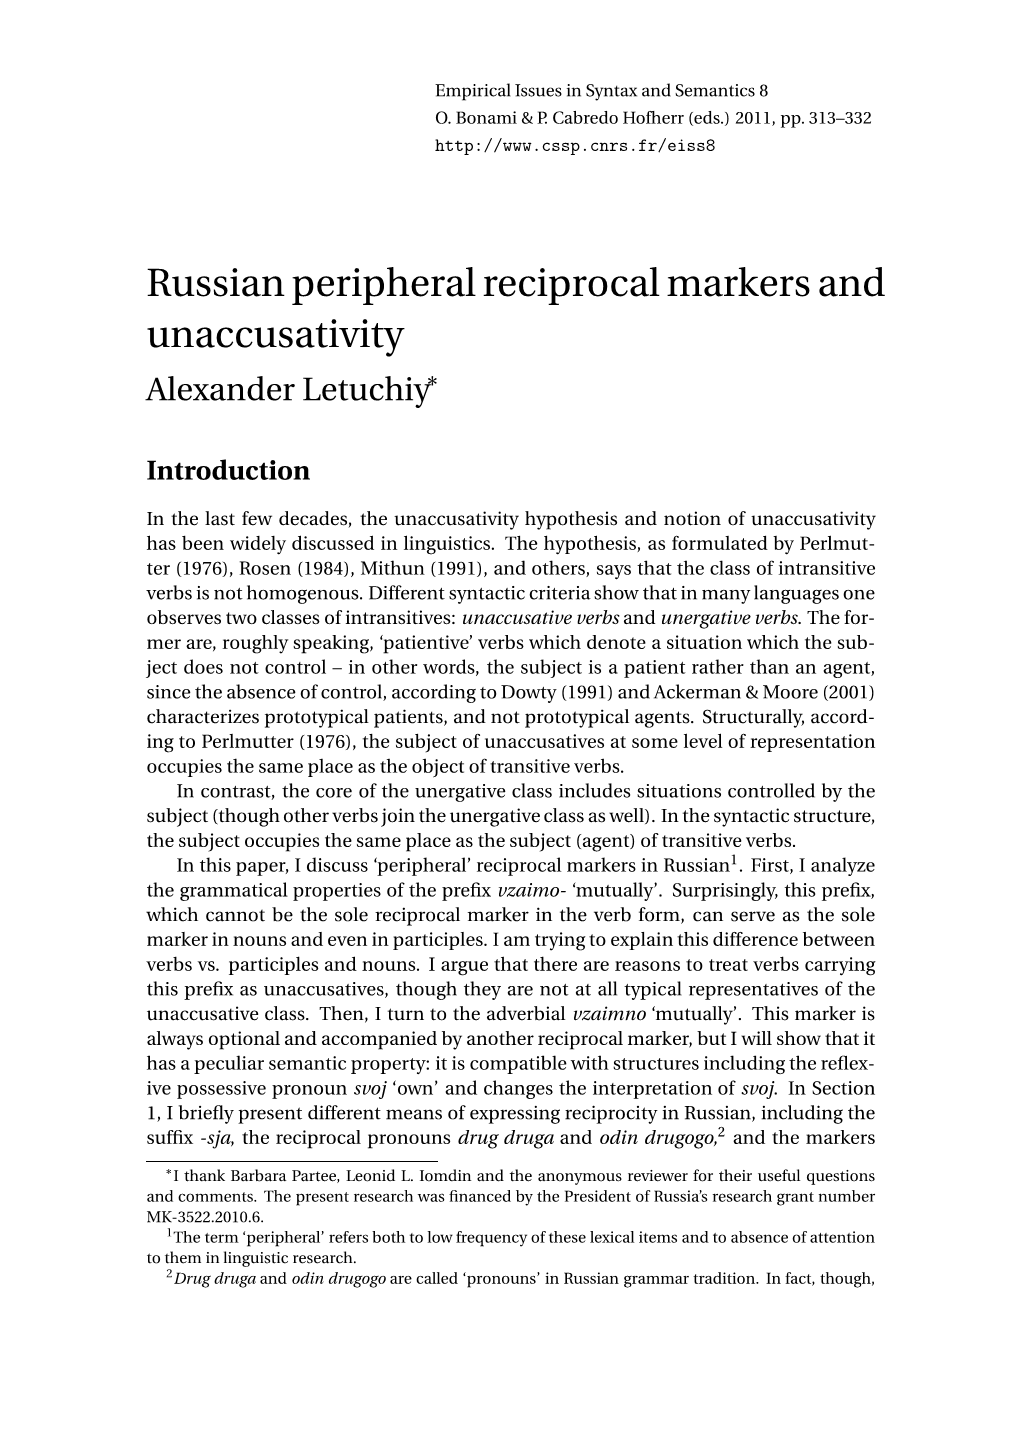 Russian Peripheral Reciprocal Markers and Unaccusativity